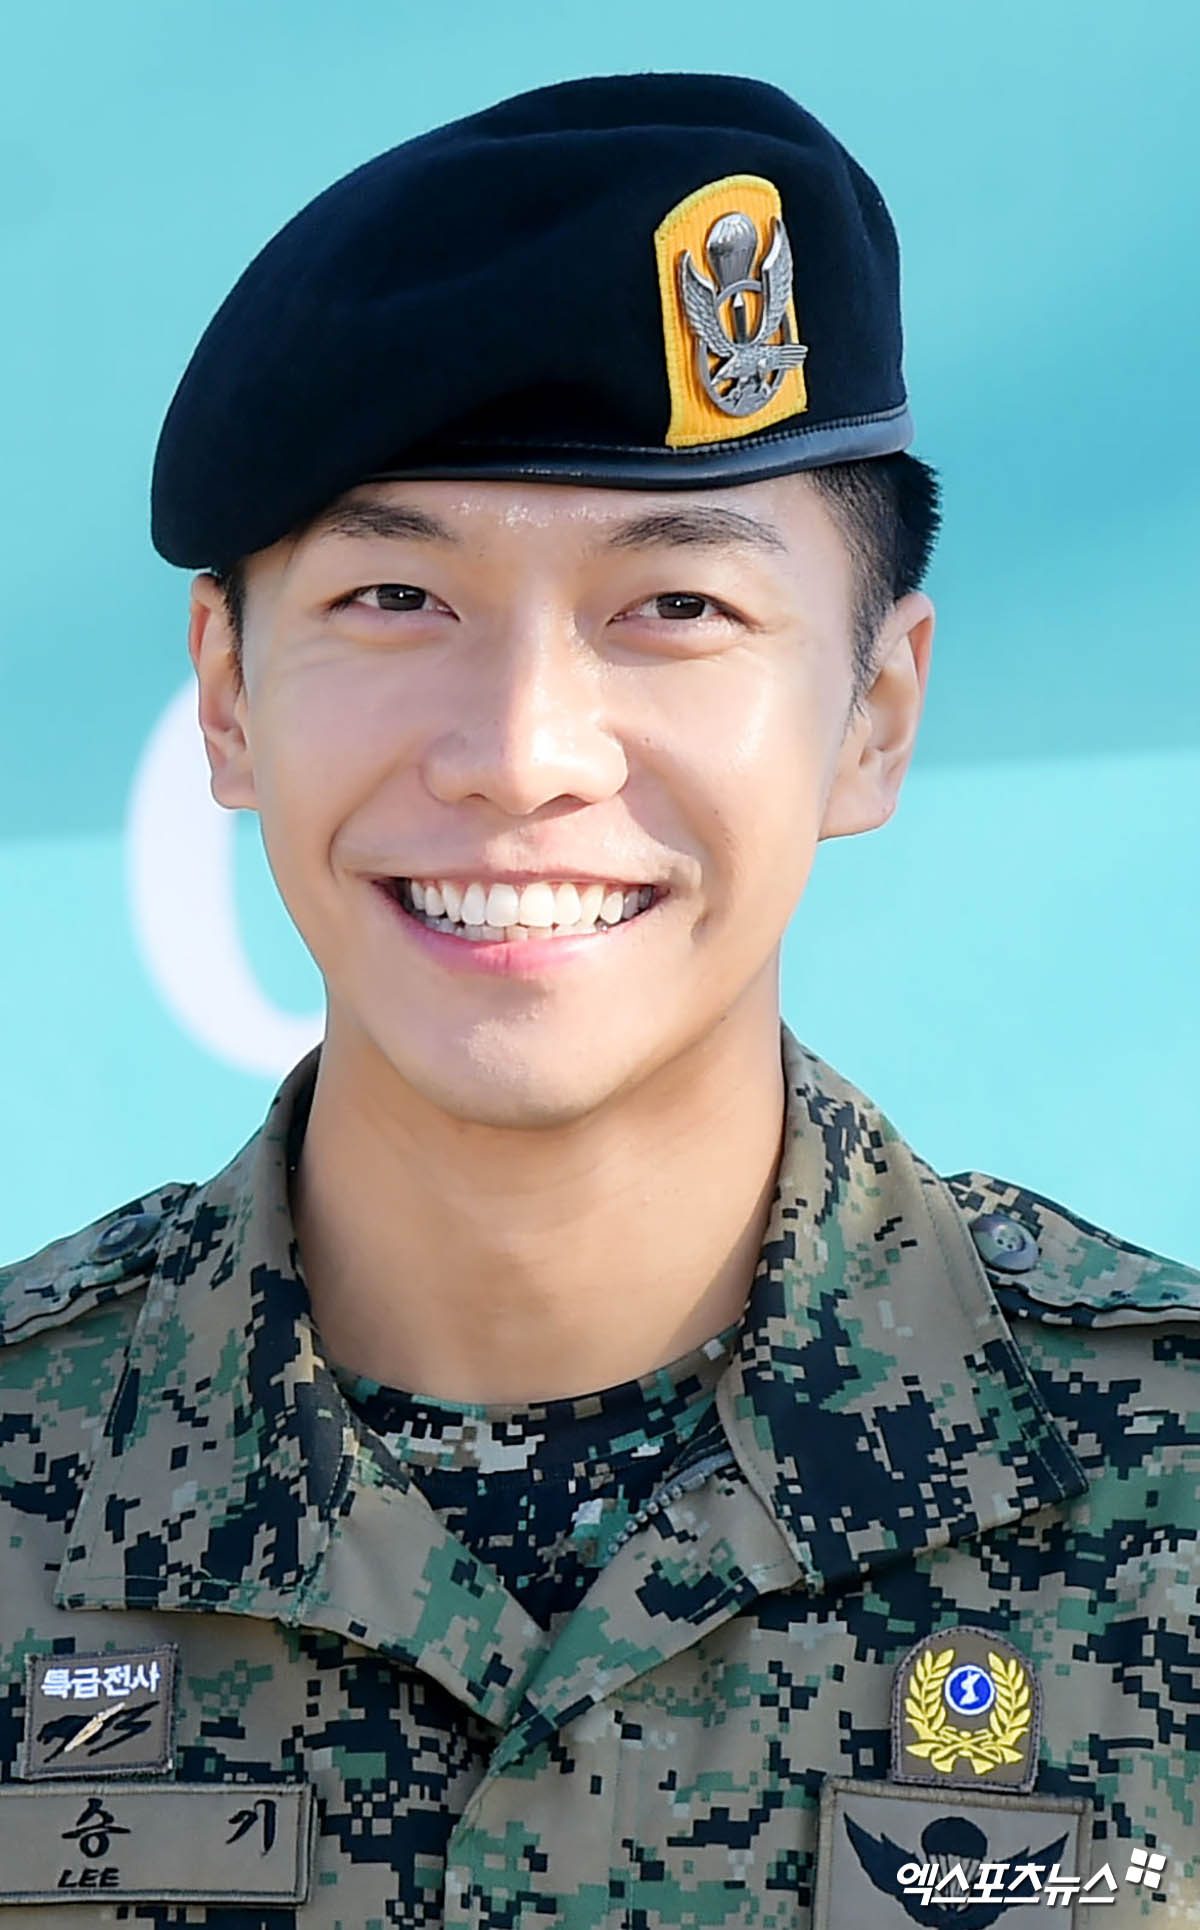 In this series, I look back on Nine Years Ago Today with entertainment and sports sites.2017On October 31, singer and actor Lee Seung-gi, who had been serving for 21 months in the 13th Airborne Special Forces Brigade Black Pyo Unit of the Army Special Warfare Command in Chungbuk Jeonpyeong-gun,On this day, there were about 400 fans from home and abroad gathered to celebrate the Discharge of Lee Seung-gi and the reporters gathered early.Lee Seung-gi, who appeared in the cheers of fans at around 9 am, gave a few impressions of the discharge greetings to reporters and fans in front of the front gate of the unit.Lee Seung-gi, along with the salute Unity, said in his discharge testimony, I did not sleep well because I felt sorry for the time to organize with the troops I had been with and the time to greet, and it felt short.Lee Seung-gi, who said frankly that it has not been too long since I left 100 days of Discharge, said, And the last 48 hours did not go before Discharge.On the other hand, I thought that many fans would like to come to the Discharge site, and I am grateful that you prepared various things including plan cards in cold weather from dawn.Ive had a lot of trouble and Im really grateful.Especially when the Ry entertainers who joined the army at the same time reported the Discharge news, it seemed as late as the news of the toxic Lee Seung-gis Discharge, and even the military pile came out with a joke.Lee Seung-gi said, I have a lot of words from Lee Seung-gi pile to Do not discharge, and I would like to thank you for waiting and prepare you hard to meet your expectations.After Discharge, Lee Seung-gi chose tvN Hwa Yugi as his return, and last year he was actively performing on SBS Bae Ga Bond.Also, SBS All The Butlers, Little Forest, Mnet Produce 48, Netflix Bum Eun is you!He has appeared in various programs such as Season 2 and Together, and has been in full swing in entertainment.Ive been a dignified piece of paper.Smile on the face.Fants to meet in 21 months.Ive been ordered to Discharge.The person who became more prominent after Discharge.A cute smile still exists.